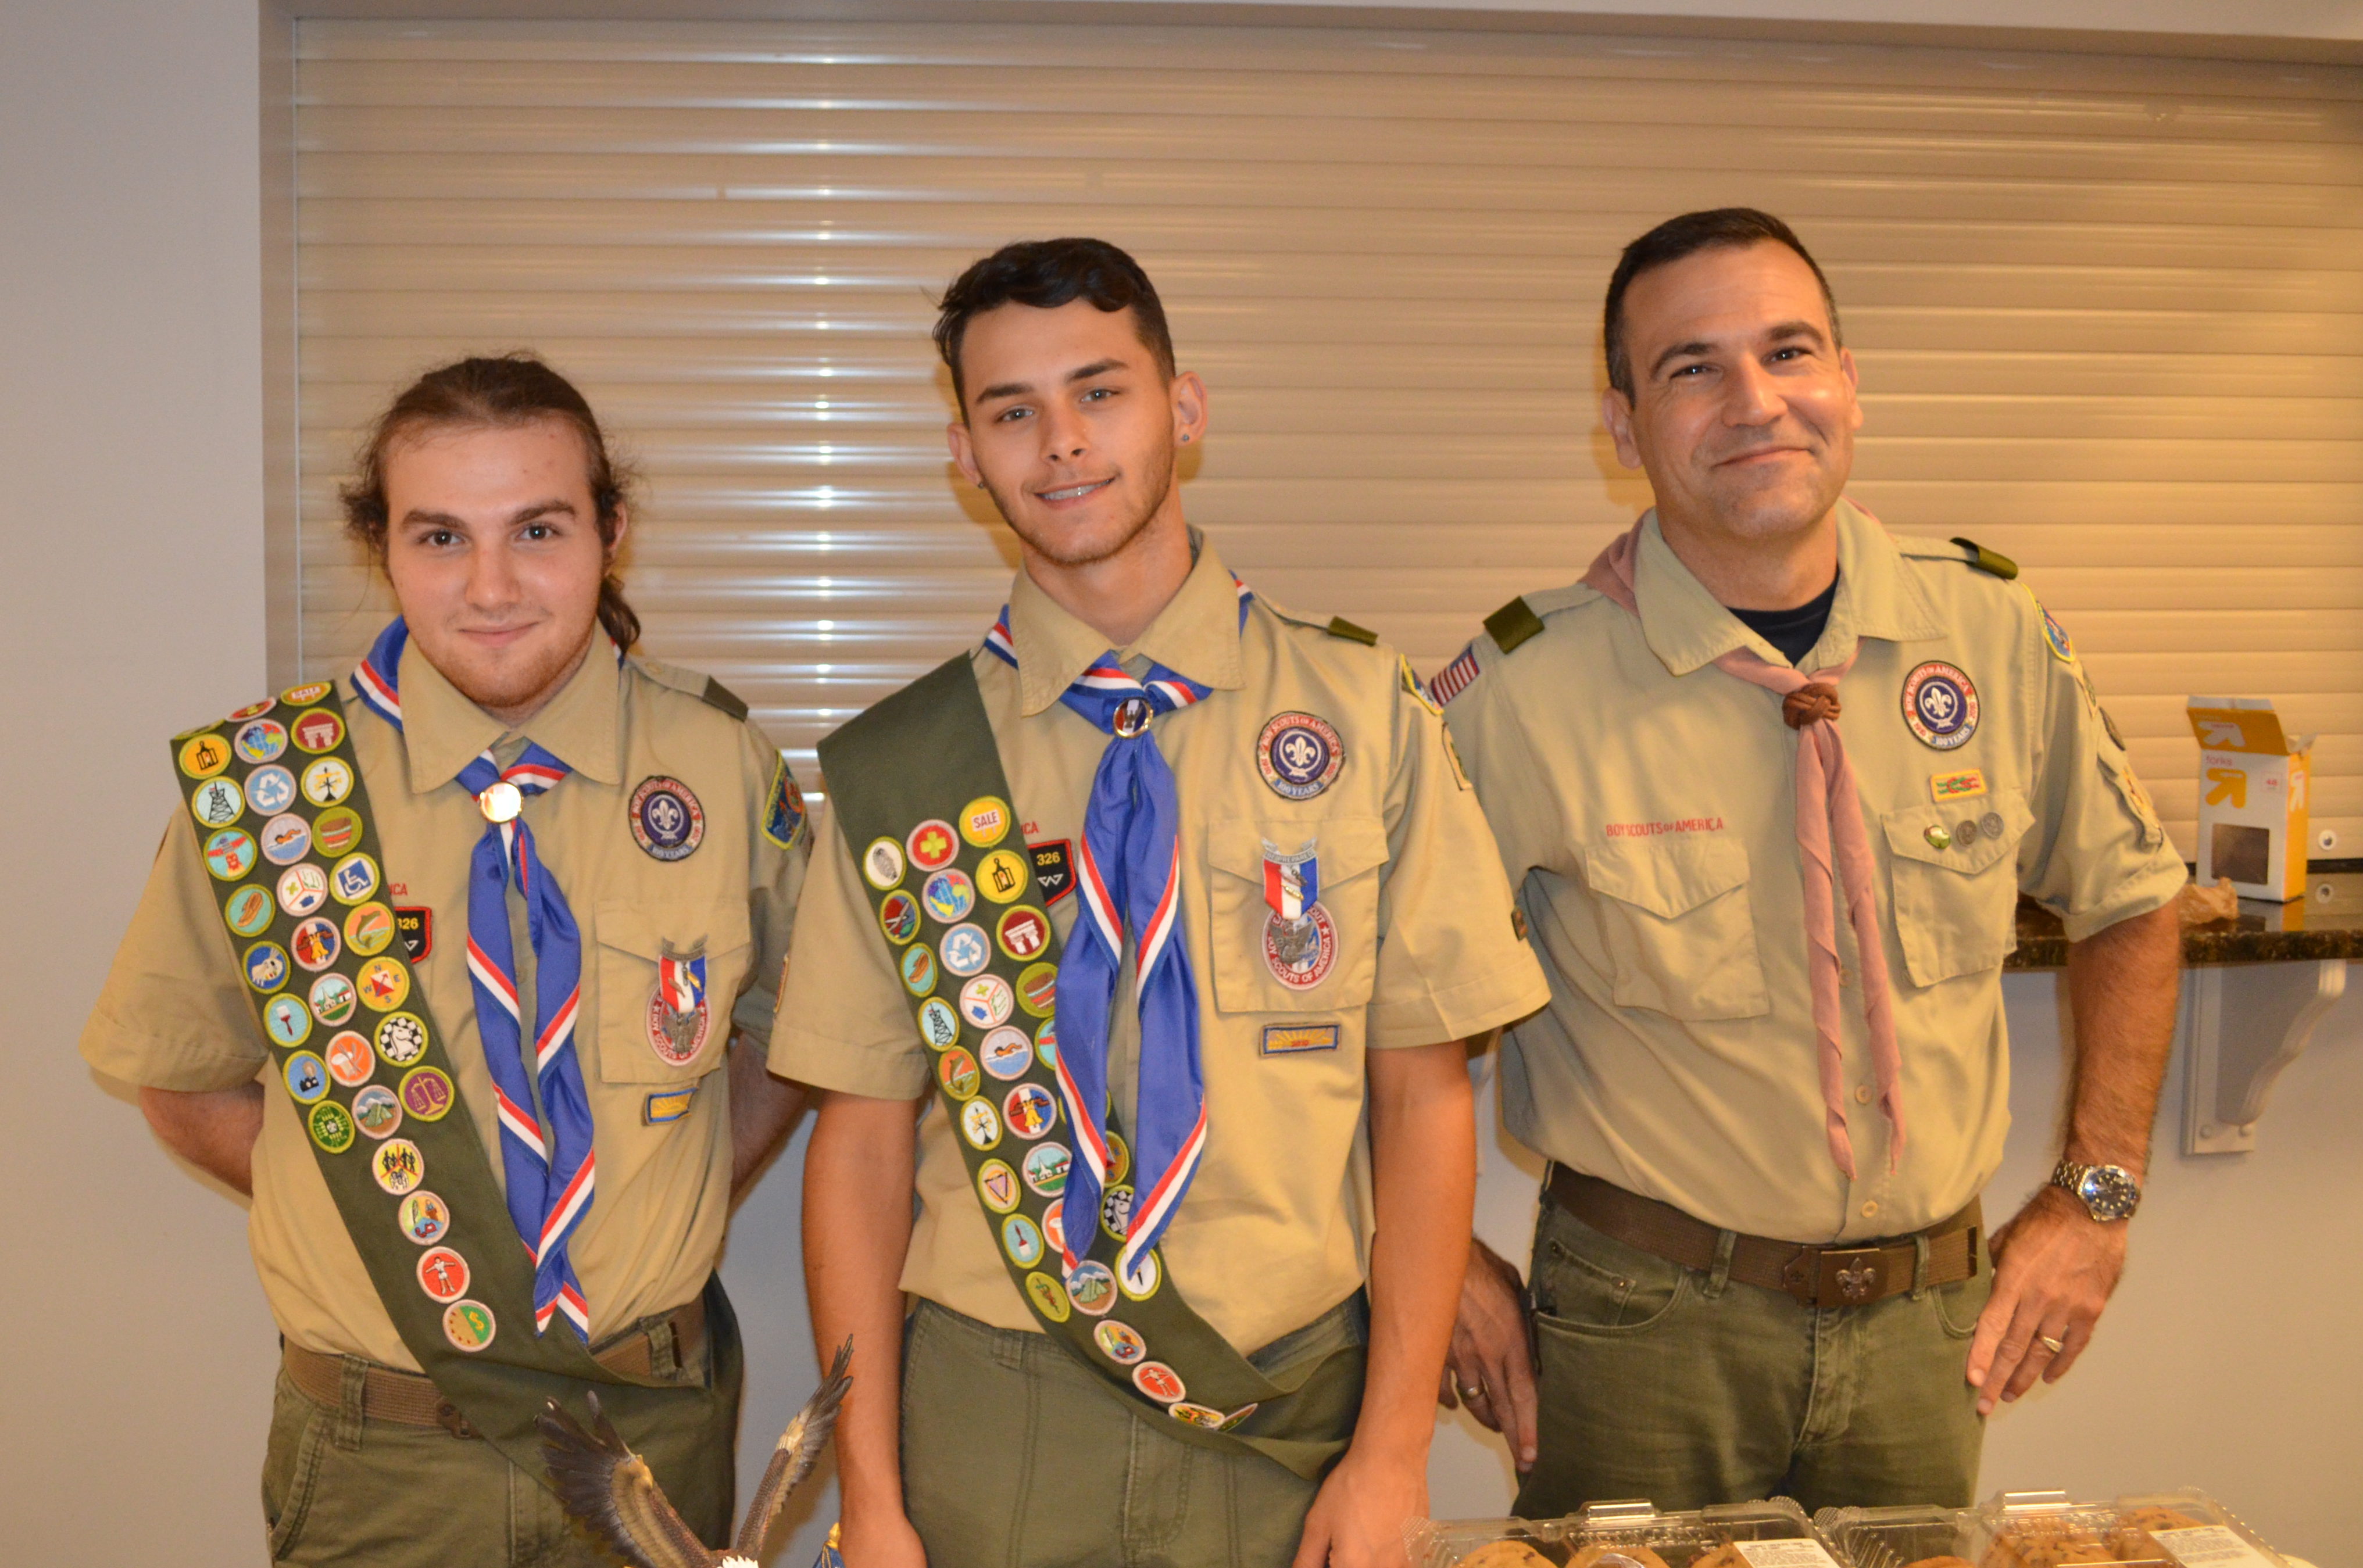 Three members of the Boy Scouts of America